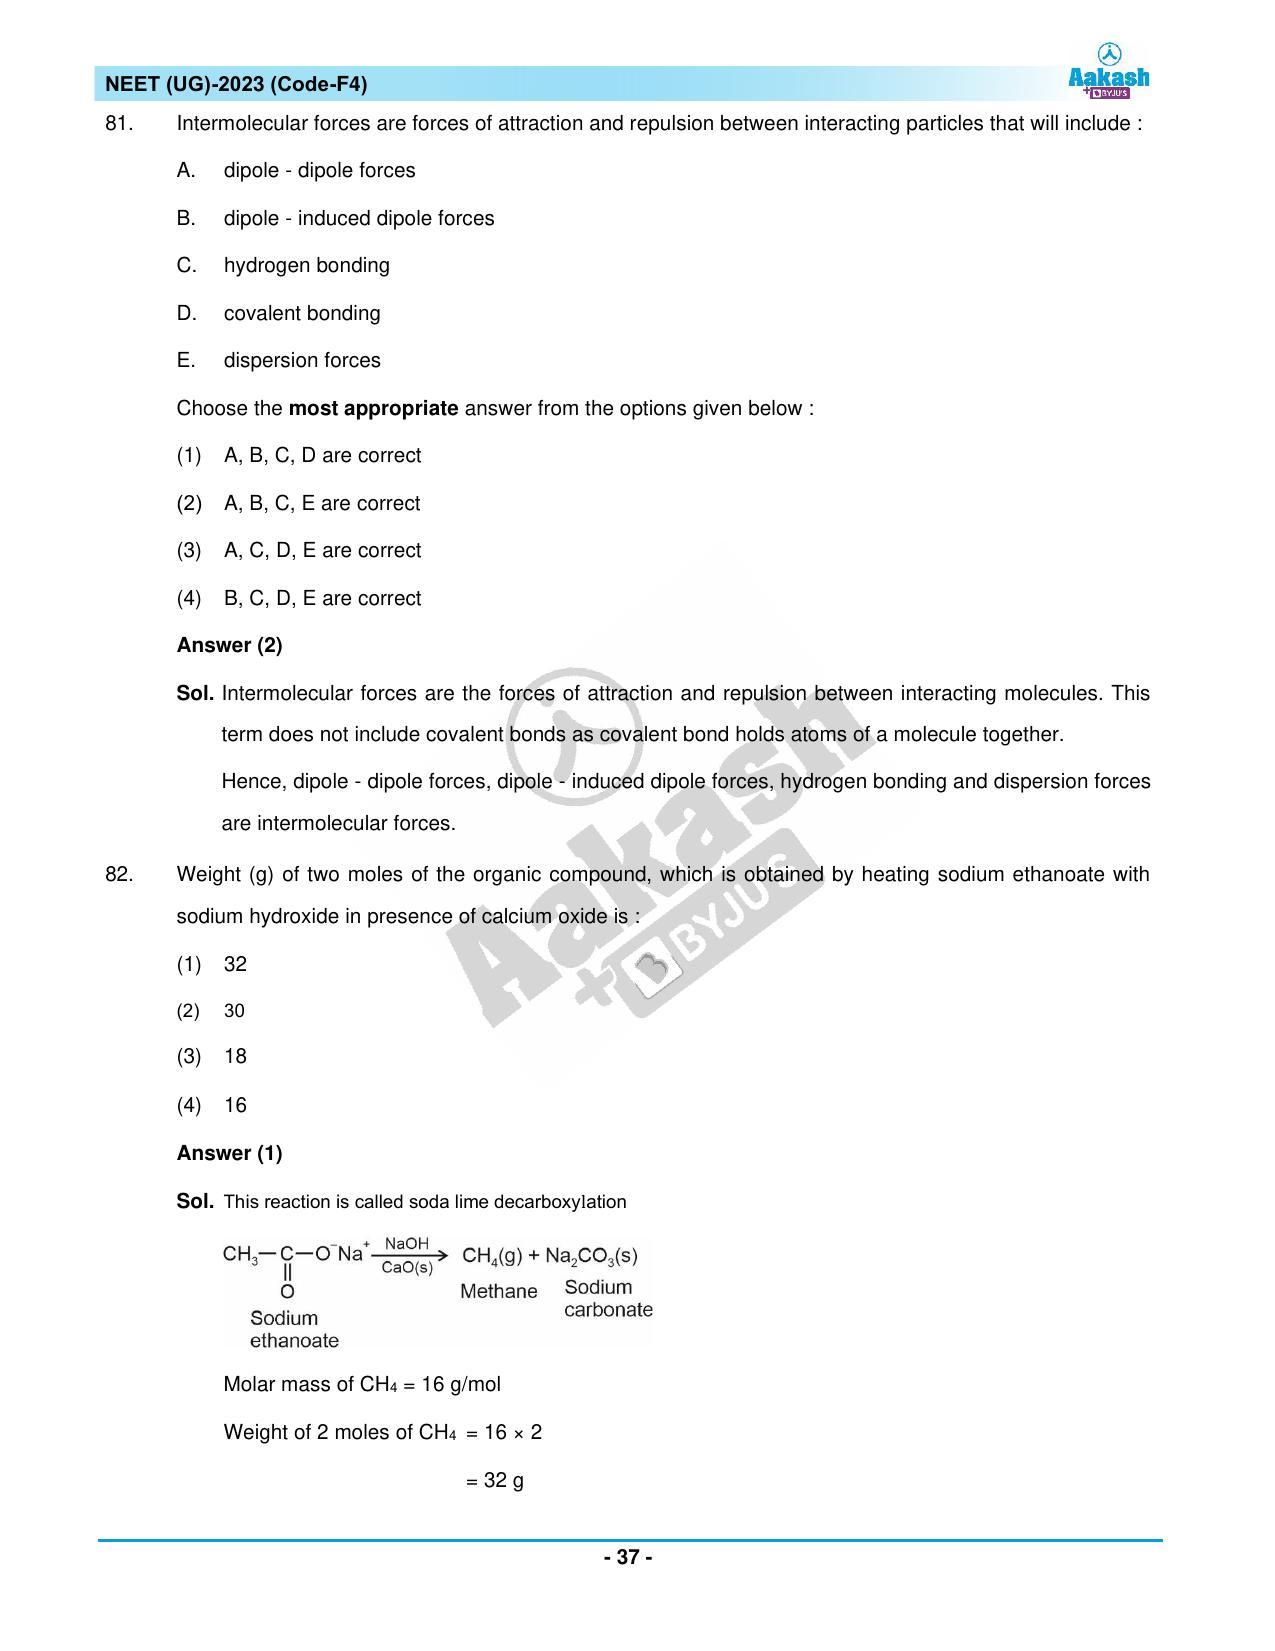 NEET 2023 Question Paper F4 - Page 37